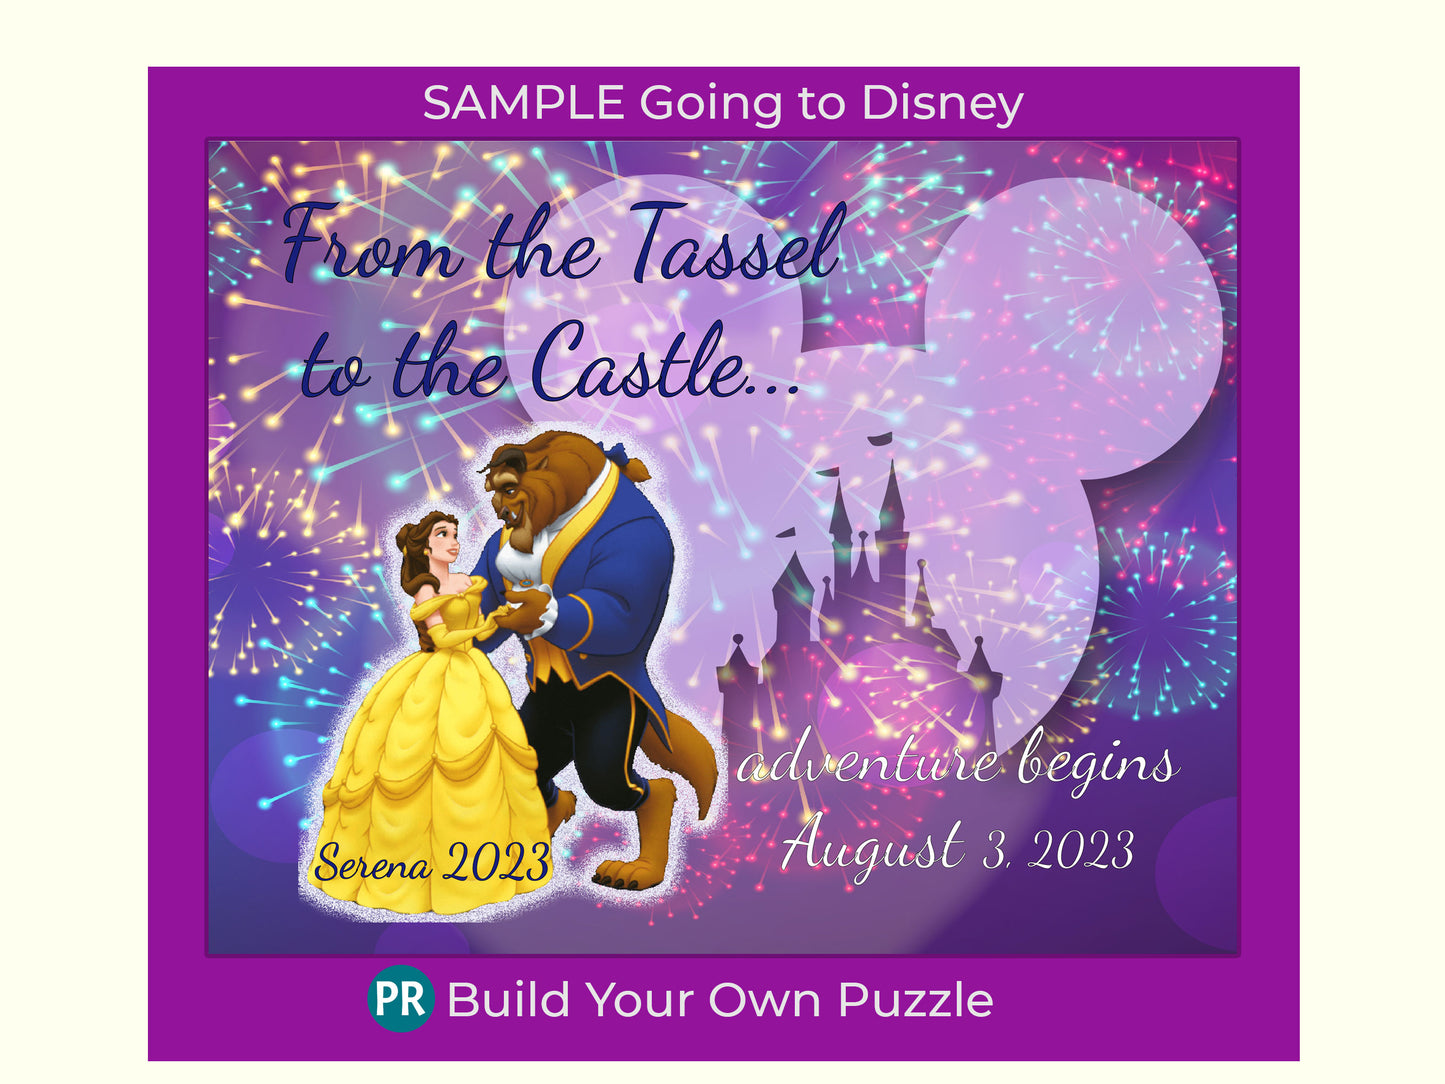 Build Your Own Custom Jigsaw Puzzle Announcement, use your image as a family, pet, or vacation photo and then add your message!